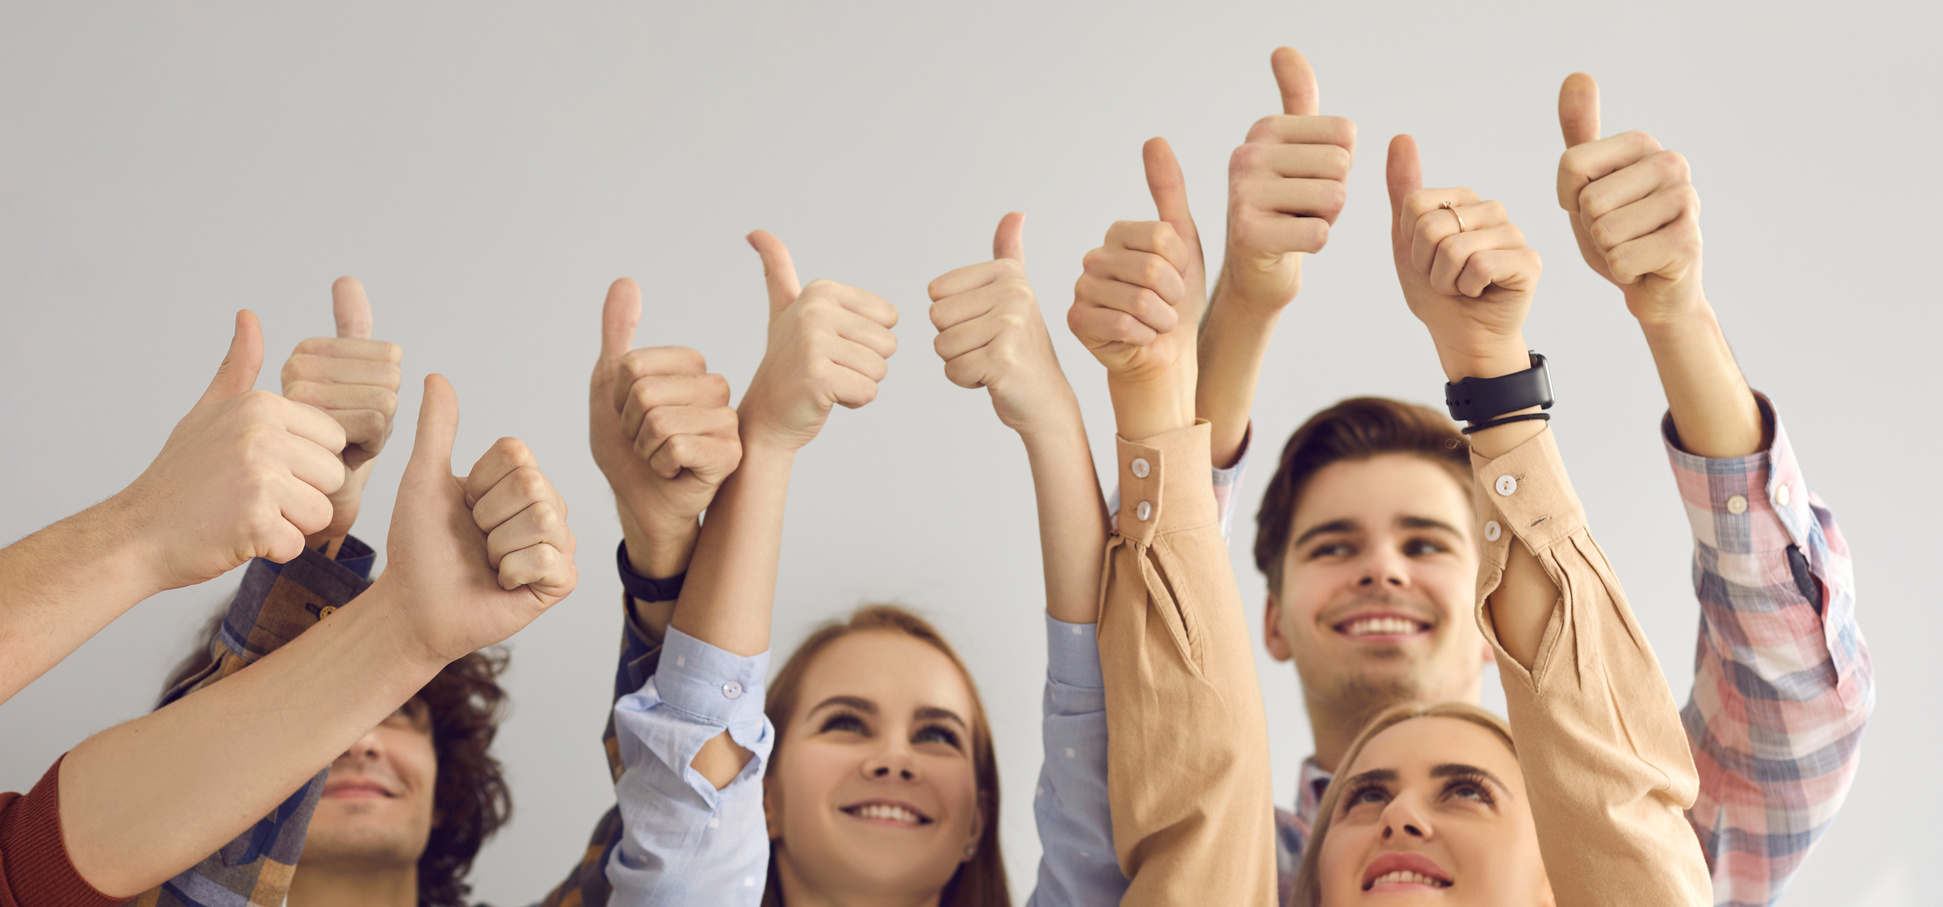 Group of People Giving Thumbs-up Showing Their Satisfaction and Positive Attitude